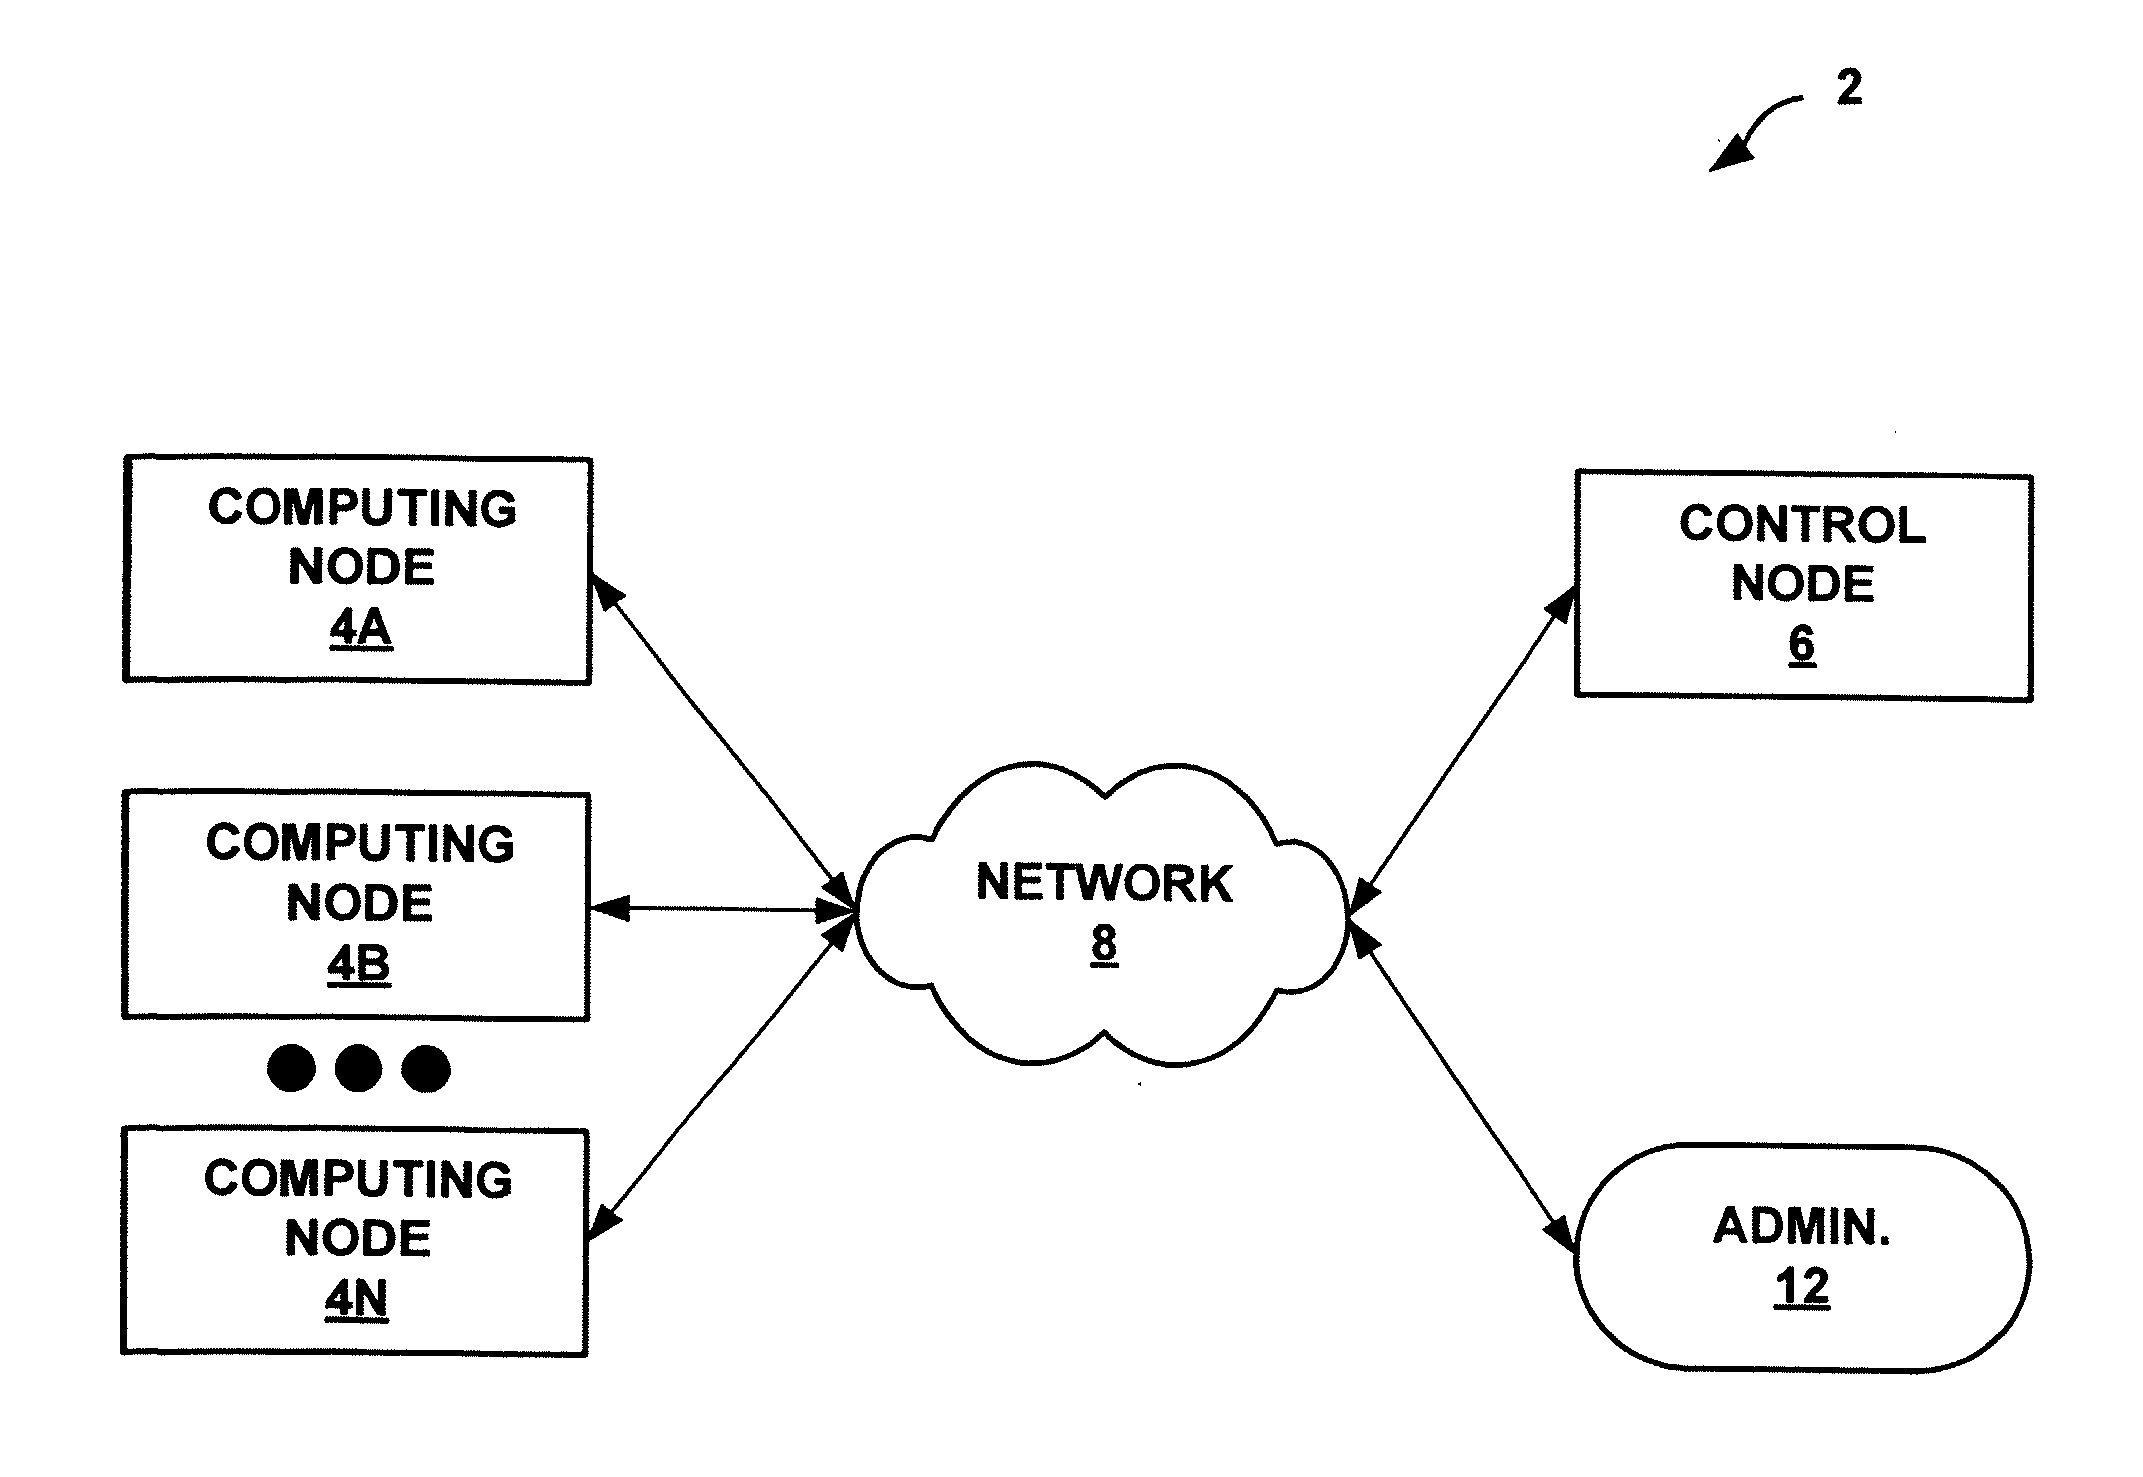 Autonomic Control of a Distributed Computing System Using Finite State Machines